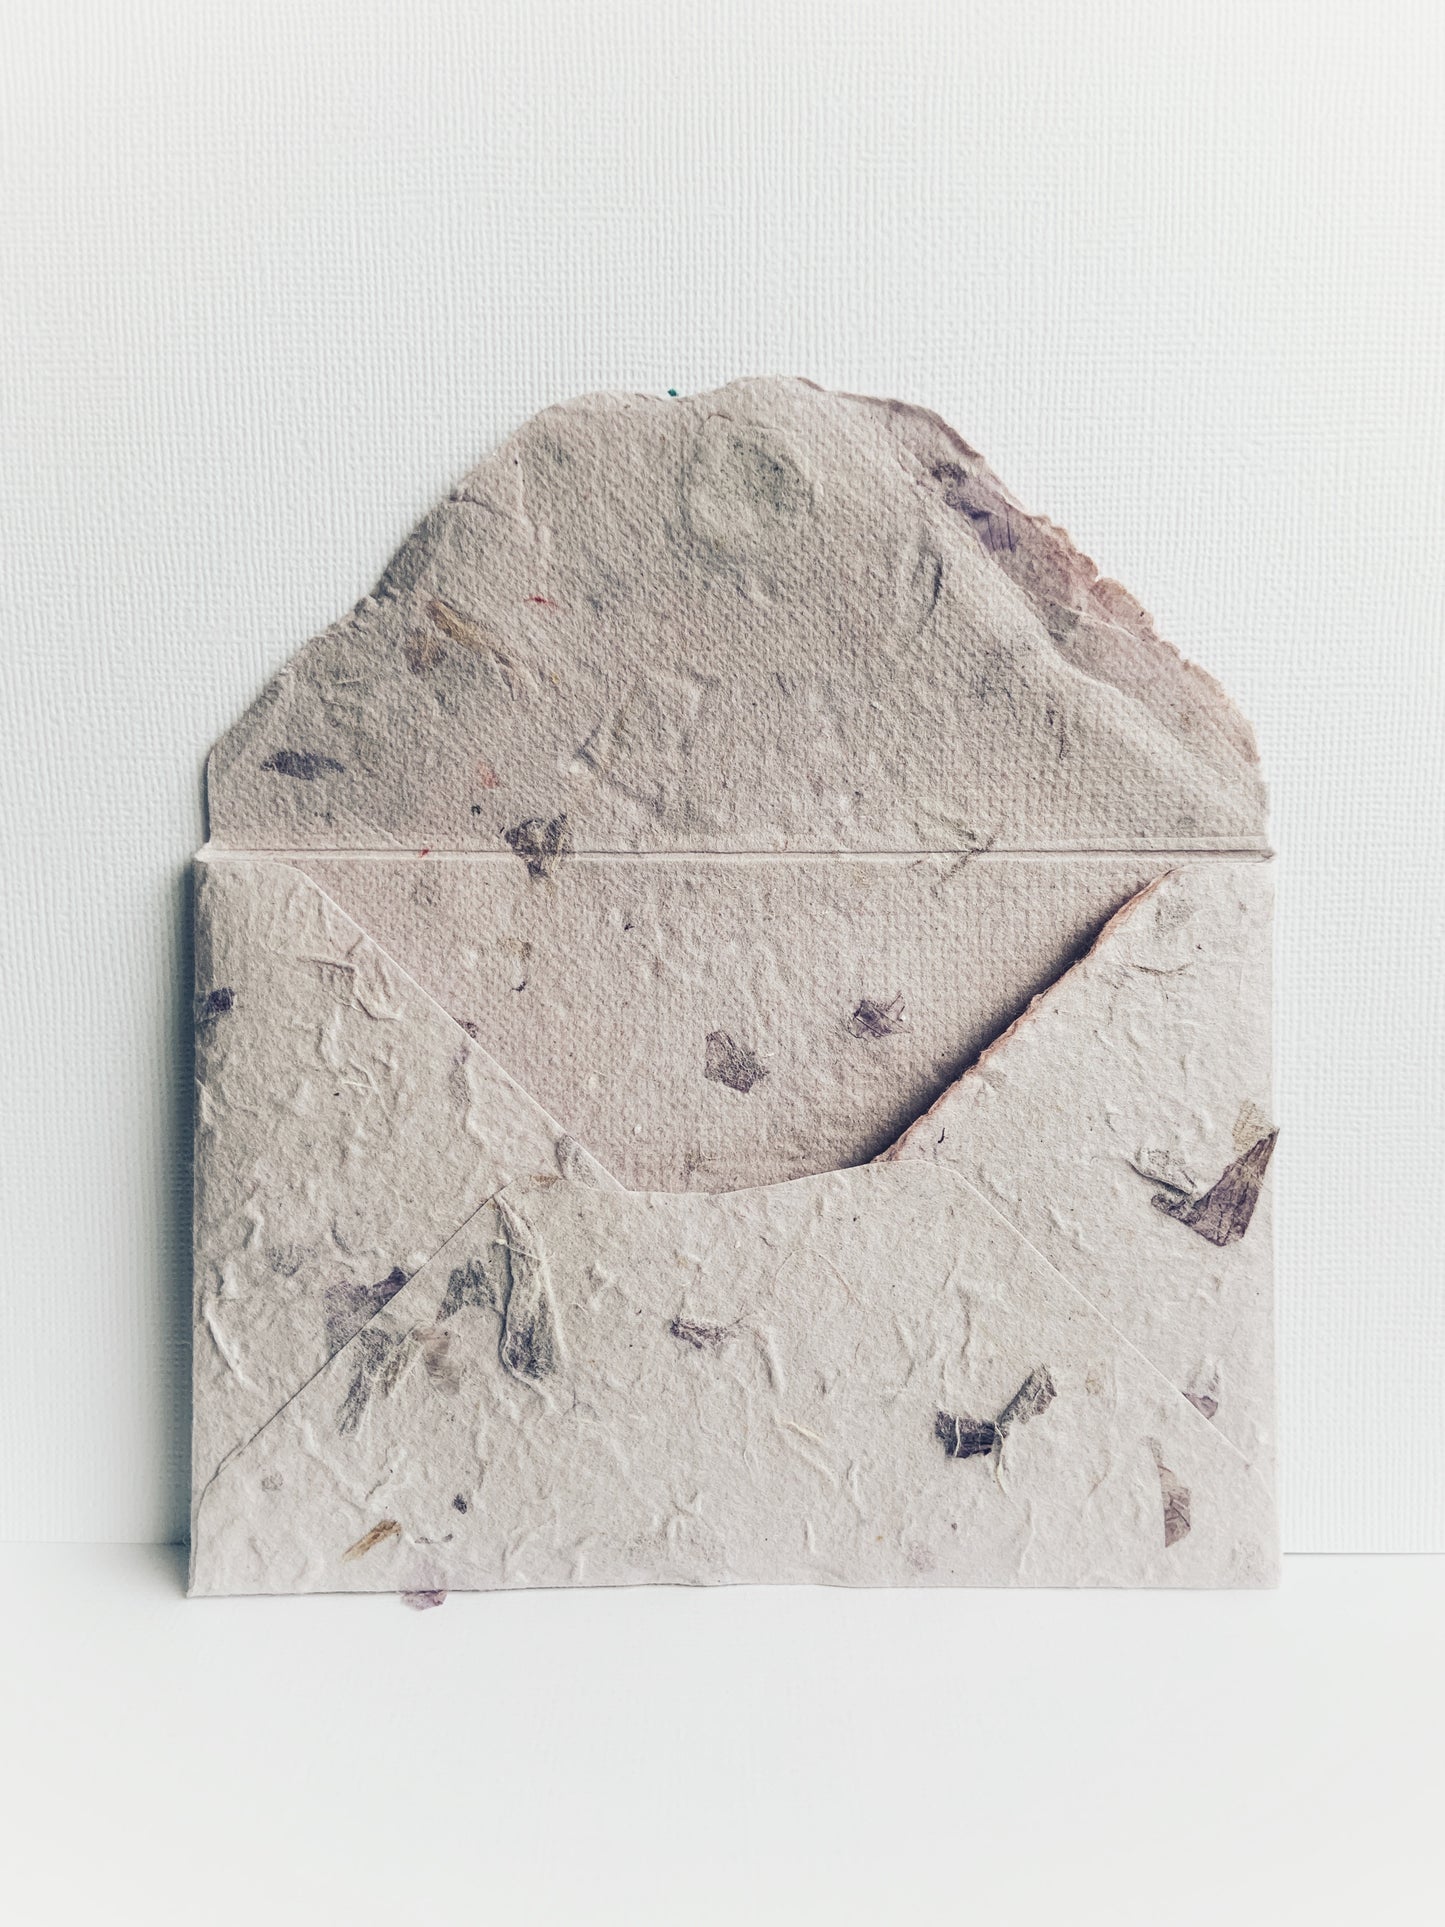 Back of a handmade envelope made from mauve handmade paper from Thailand showing detail on the inside and flap. Small pieces of dried flowers add to the paper's texture.